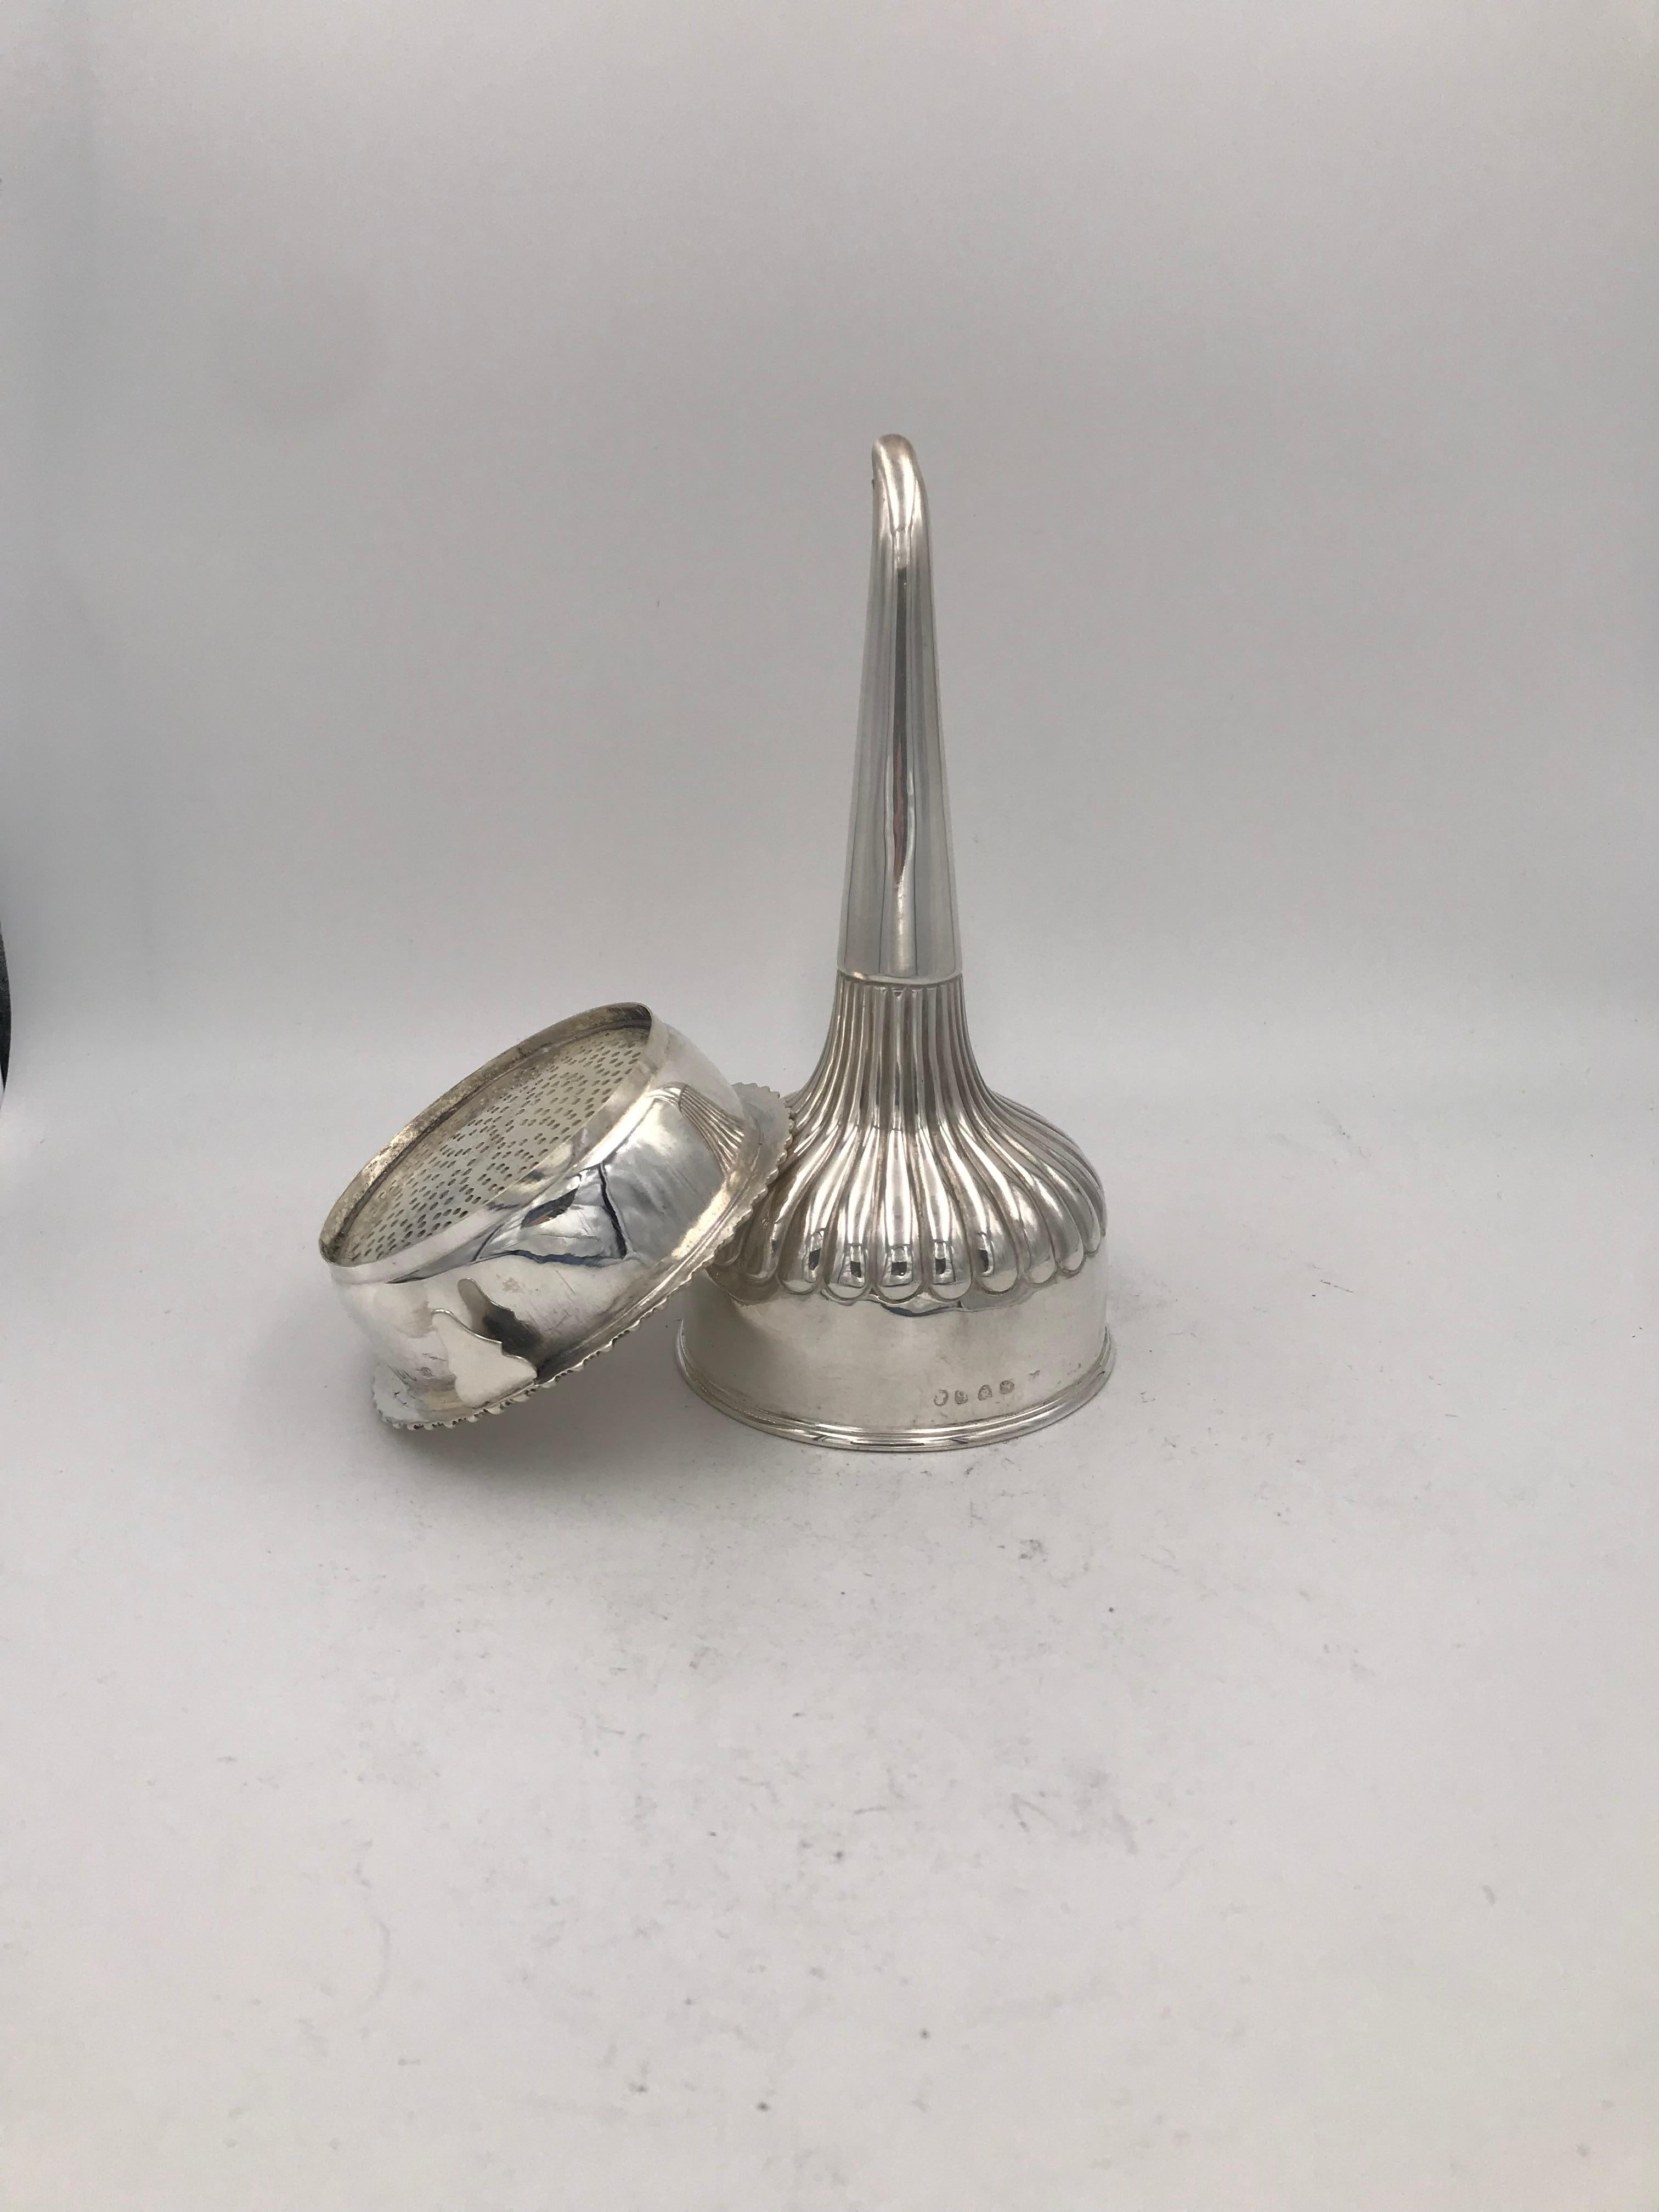 Hand-Crafted English Silver Wine Funnel